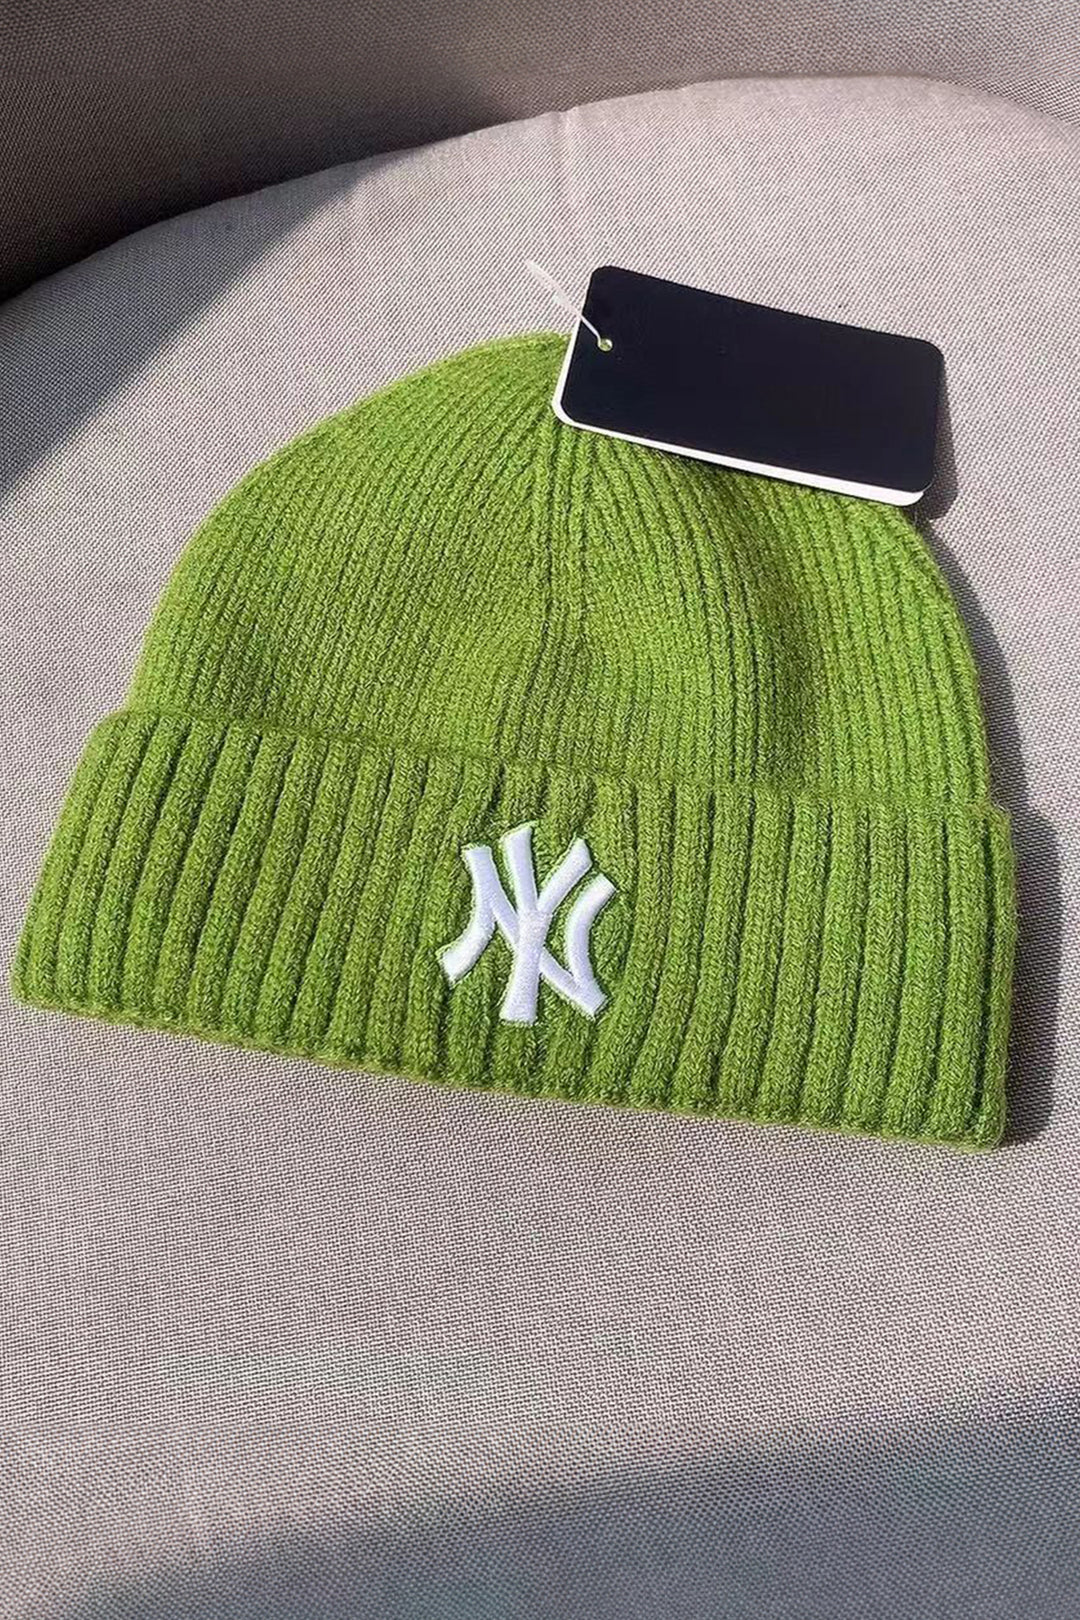 Green NY Classic Knitted Beanie - W23 - UBH0025